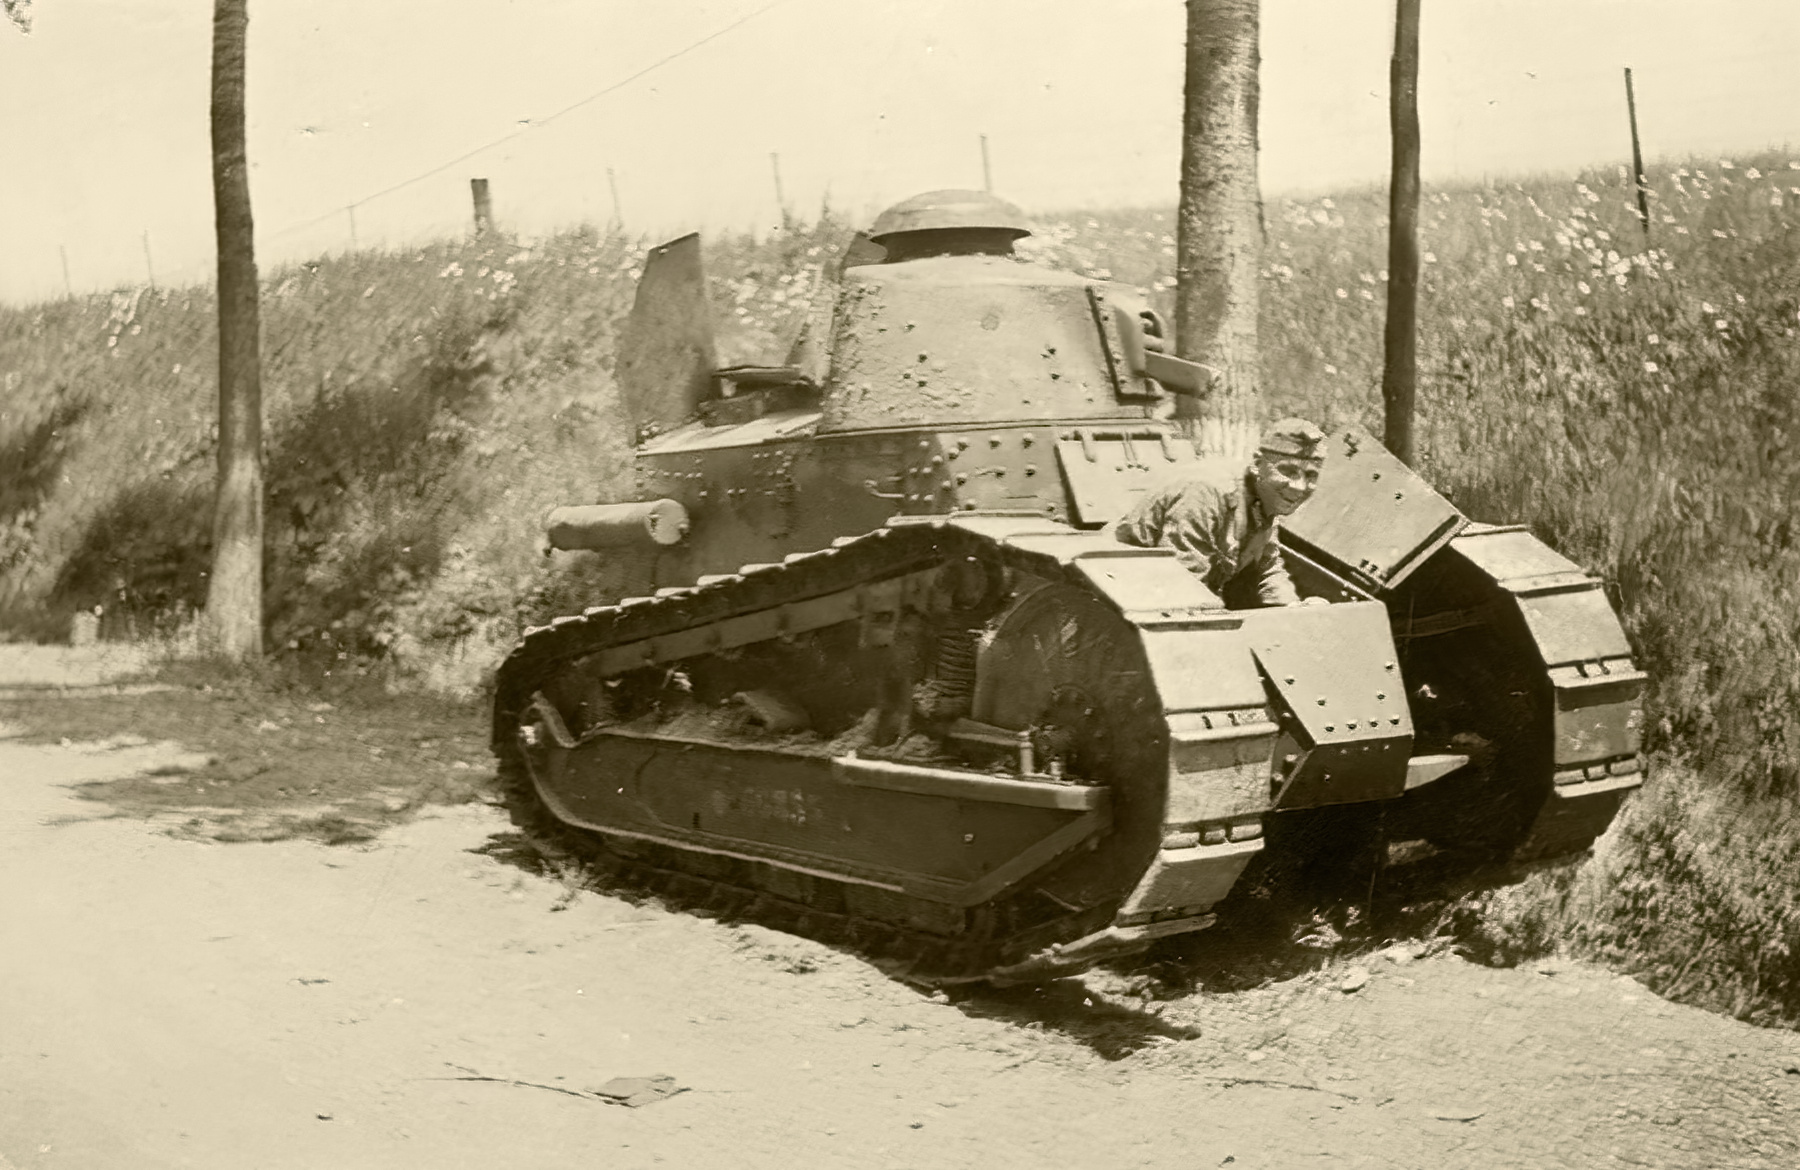 French Army Renault FT 17 sn 83208 captured during the Battle of France 1940 ebay 01